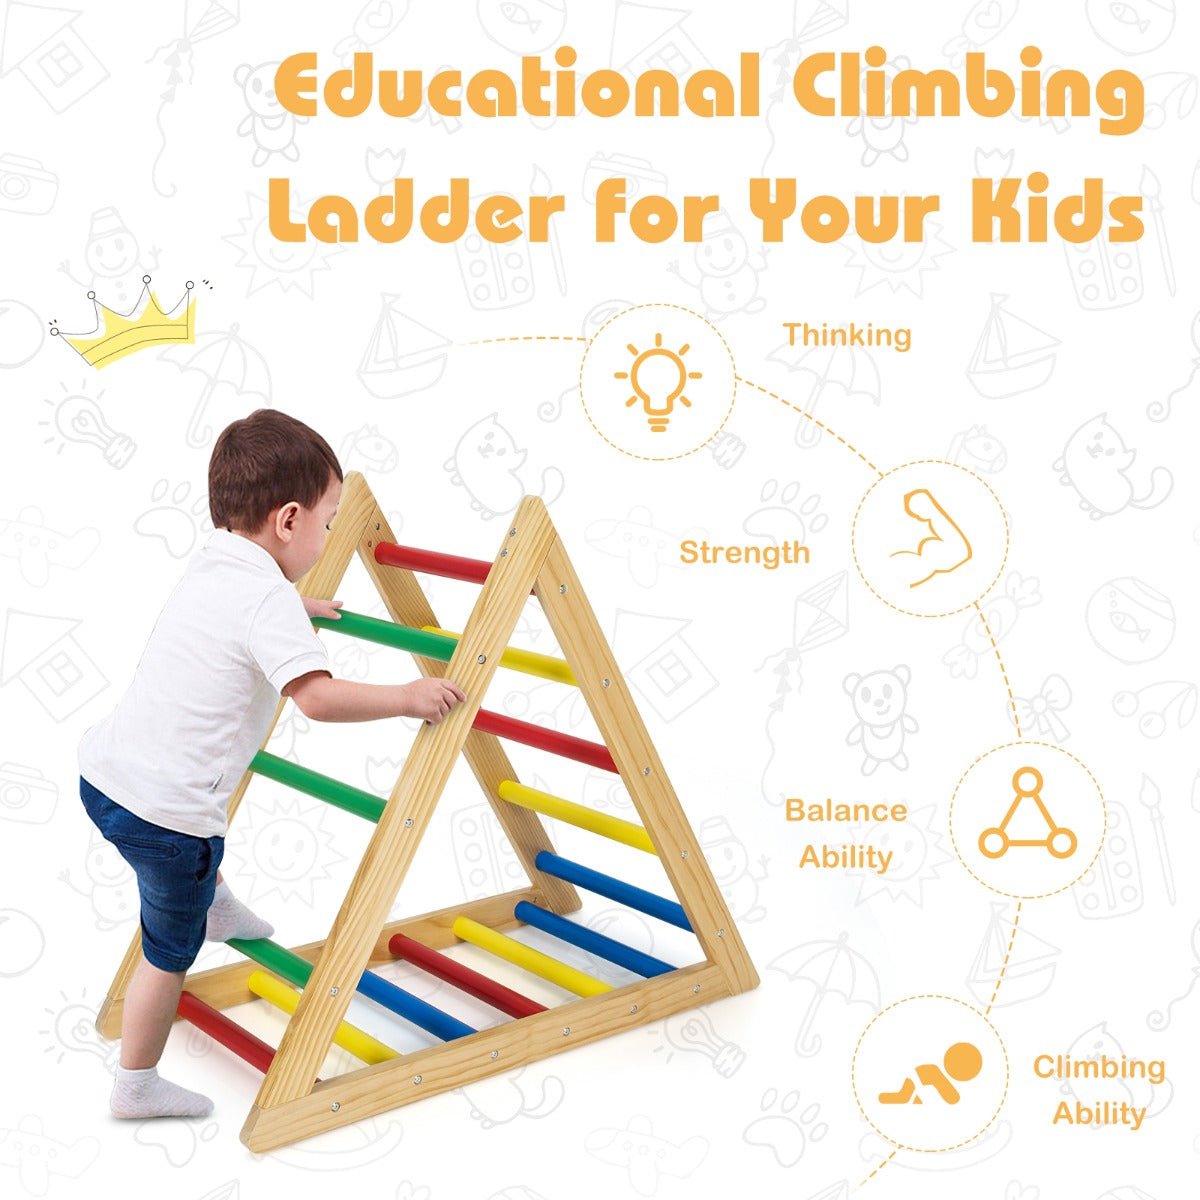 Kid's Wooden Climbing Triangle Ladder - Add Adventure to Living Space